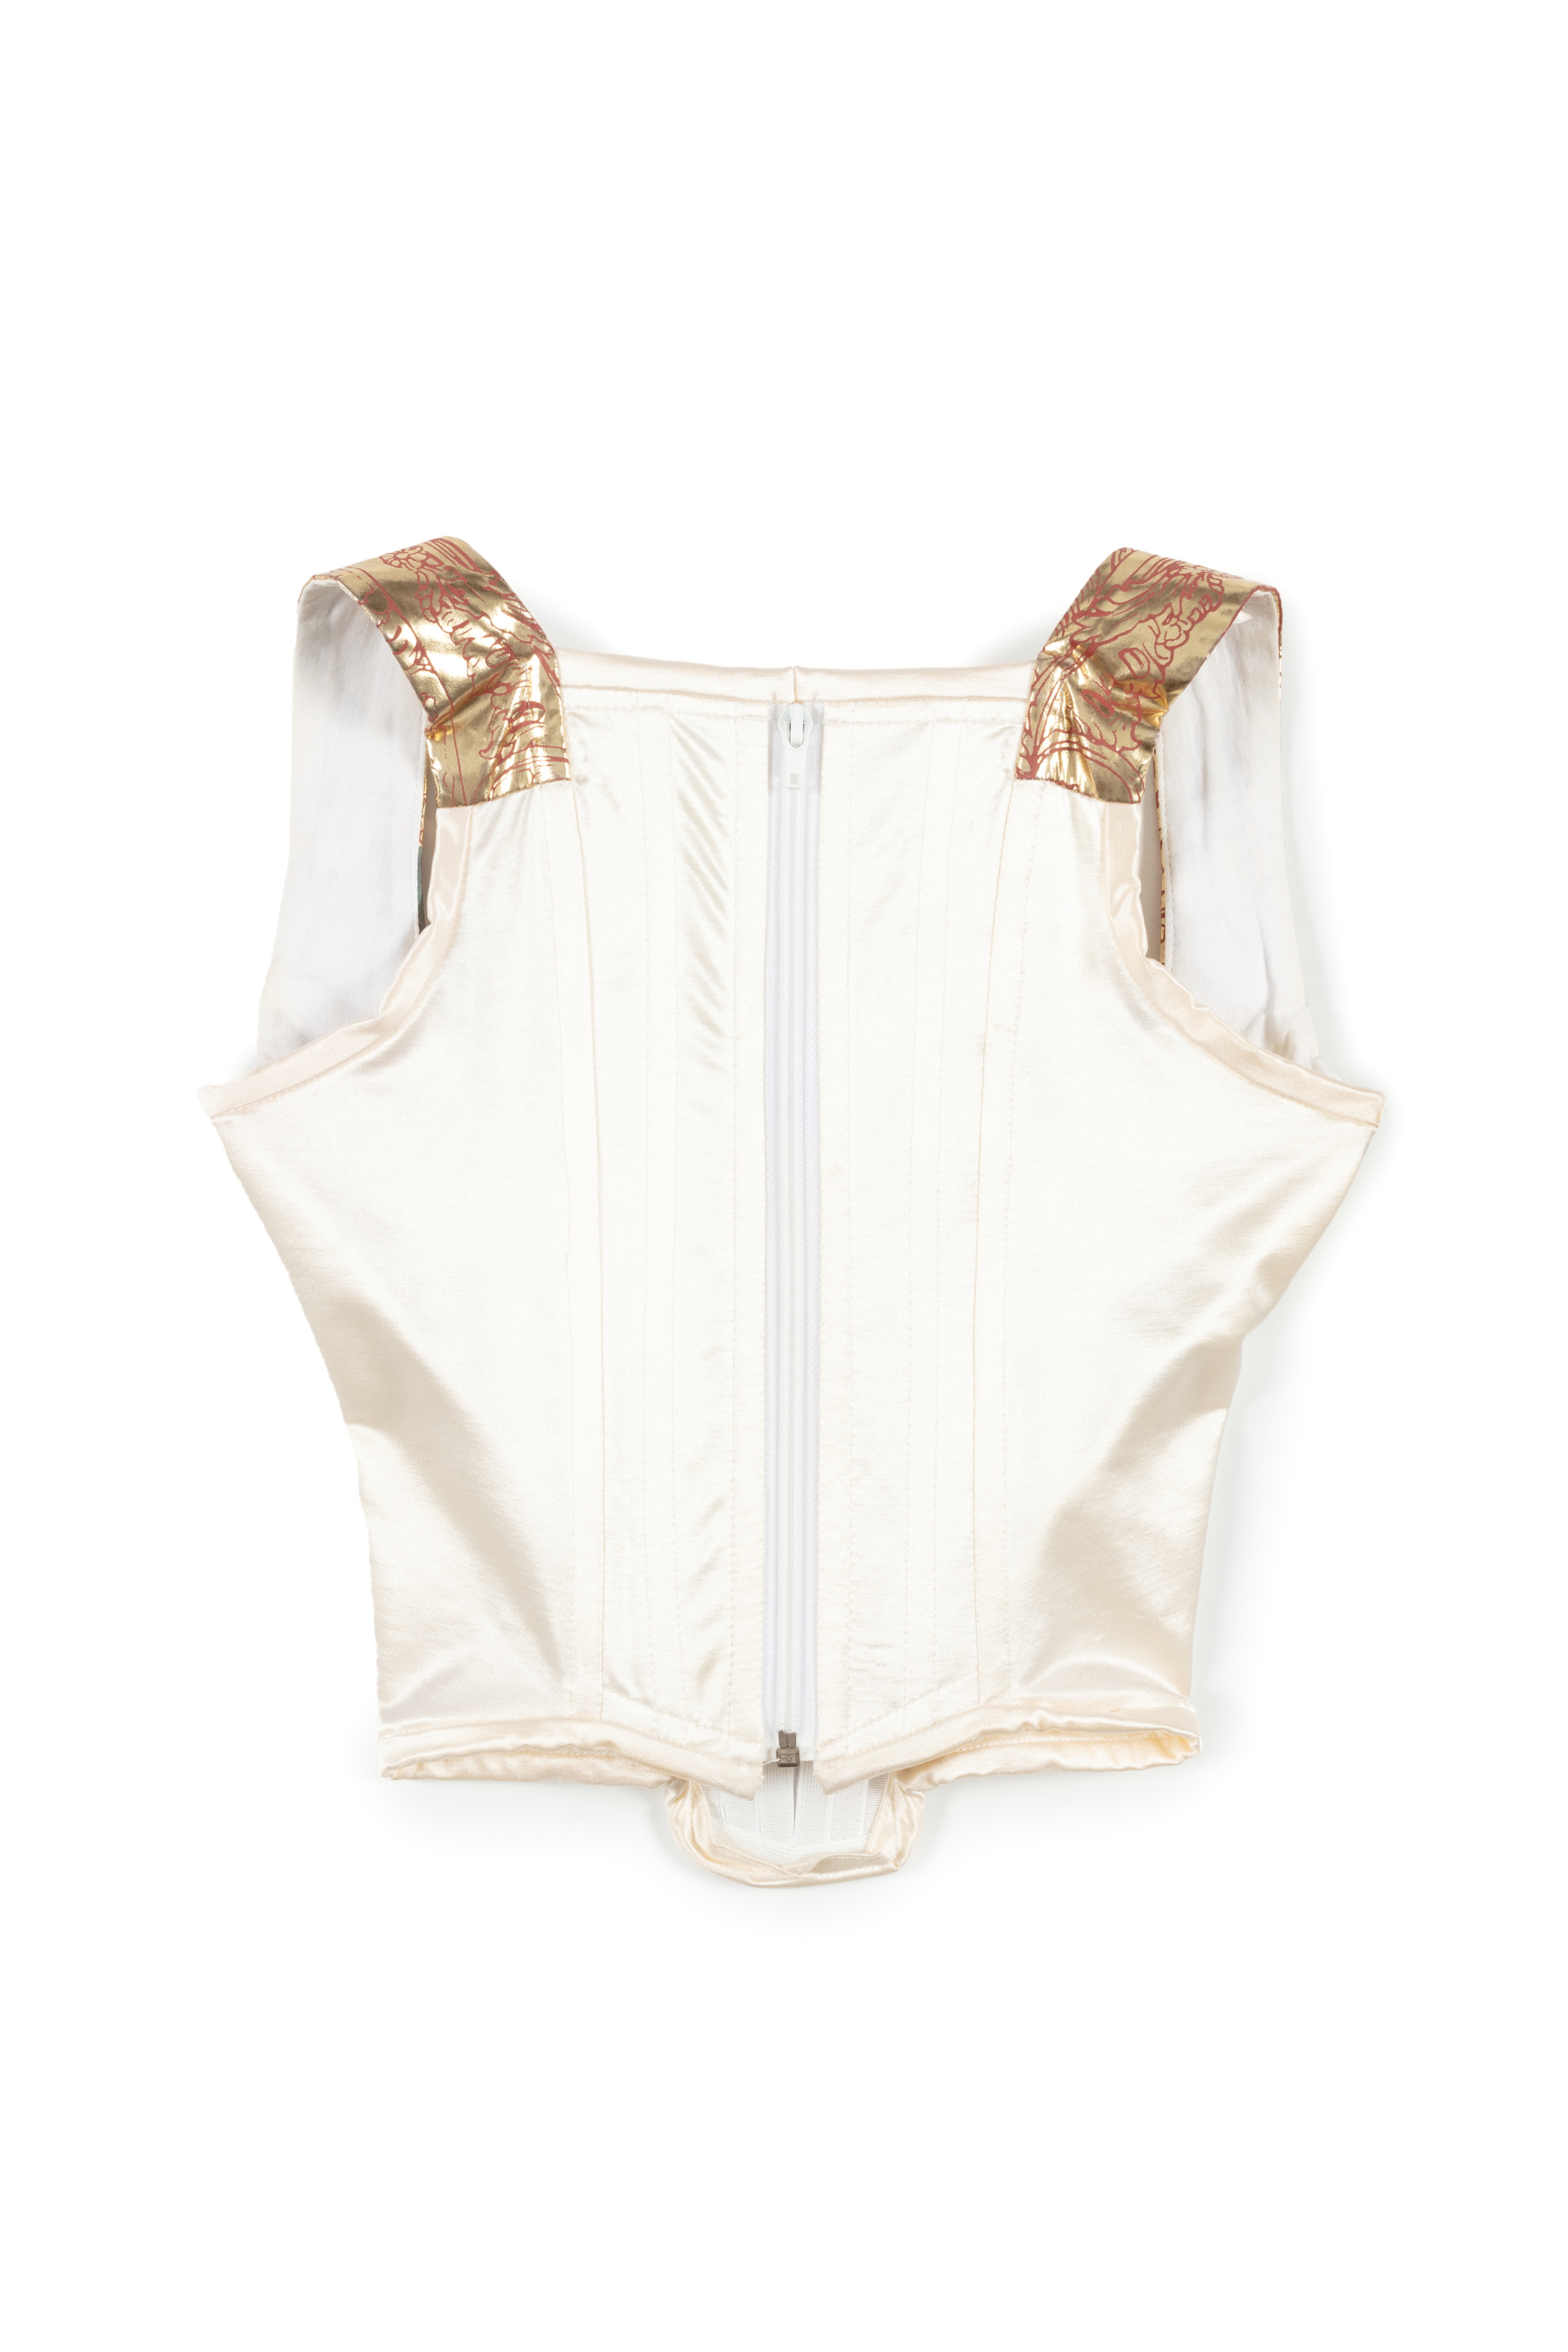 Womens corset by Vivienne Westwood